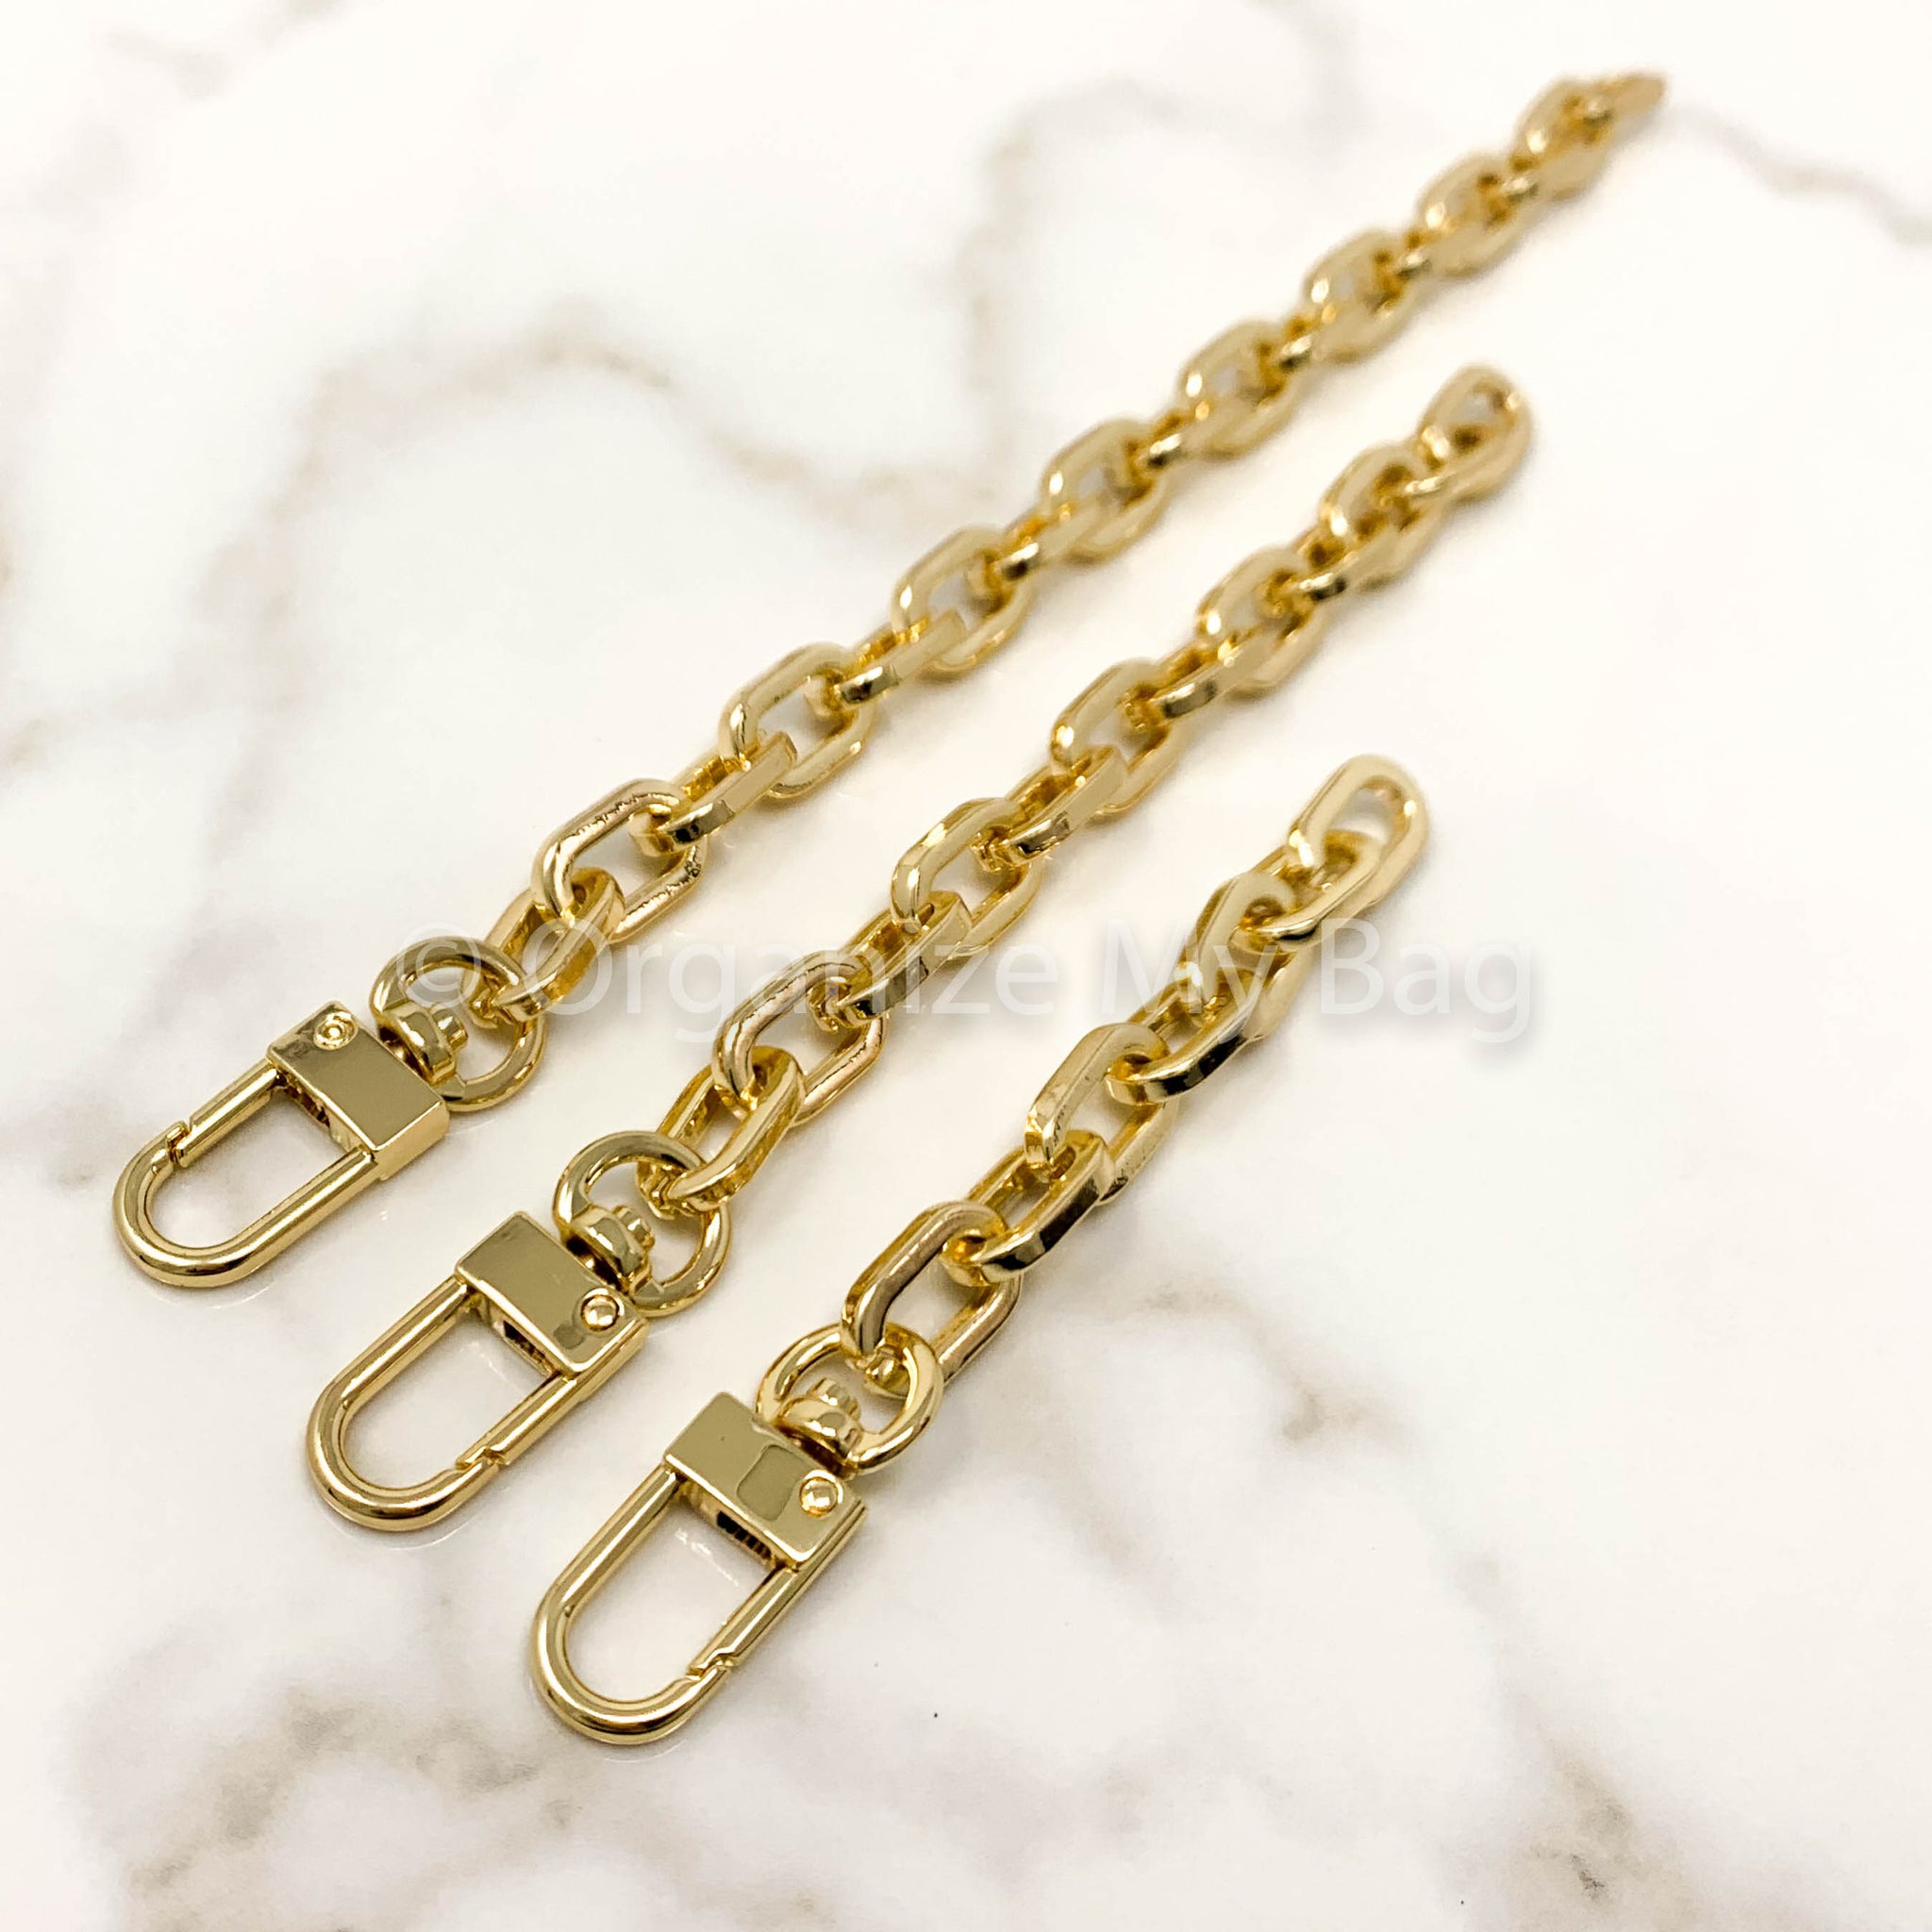 2 inch gold chain purse strap extender for lv